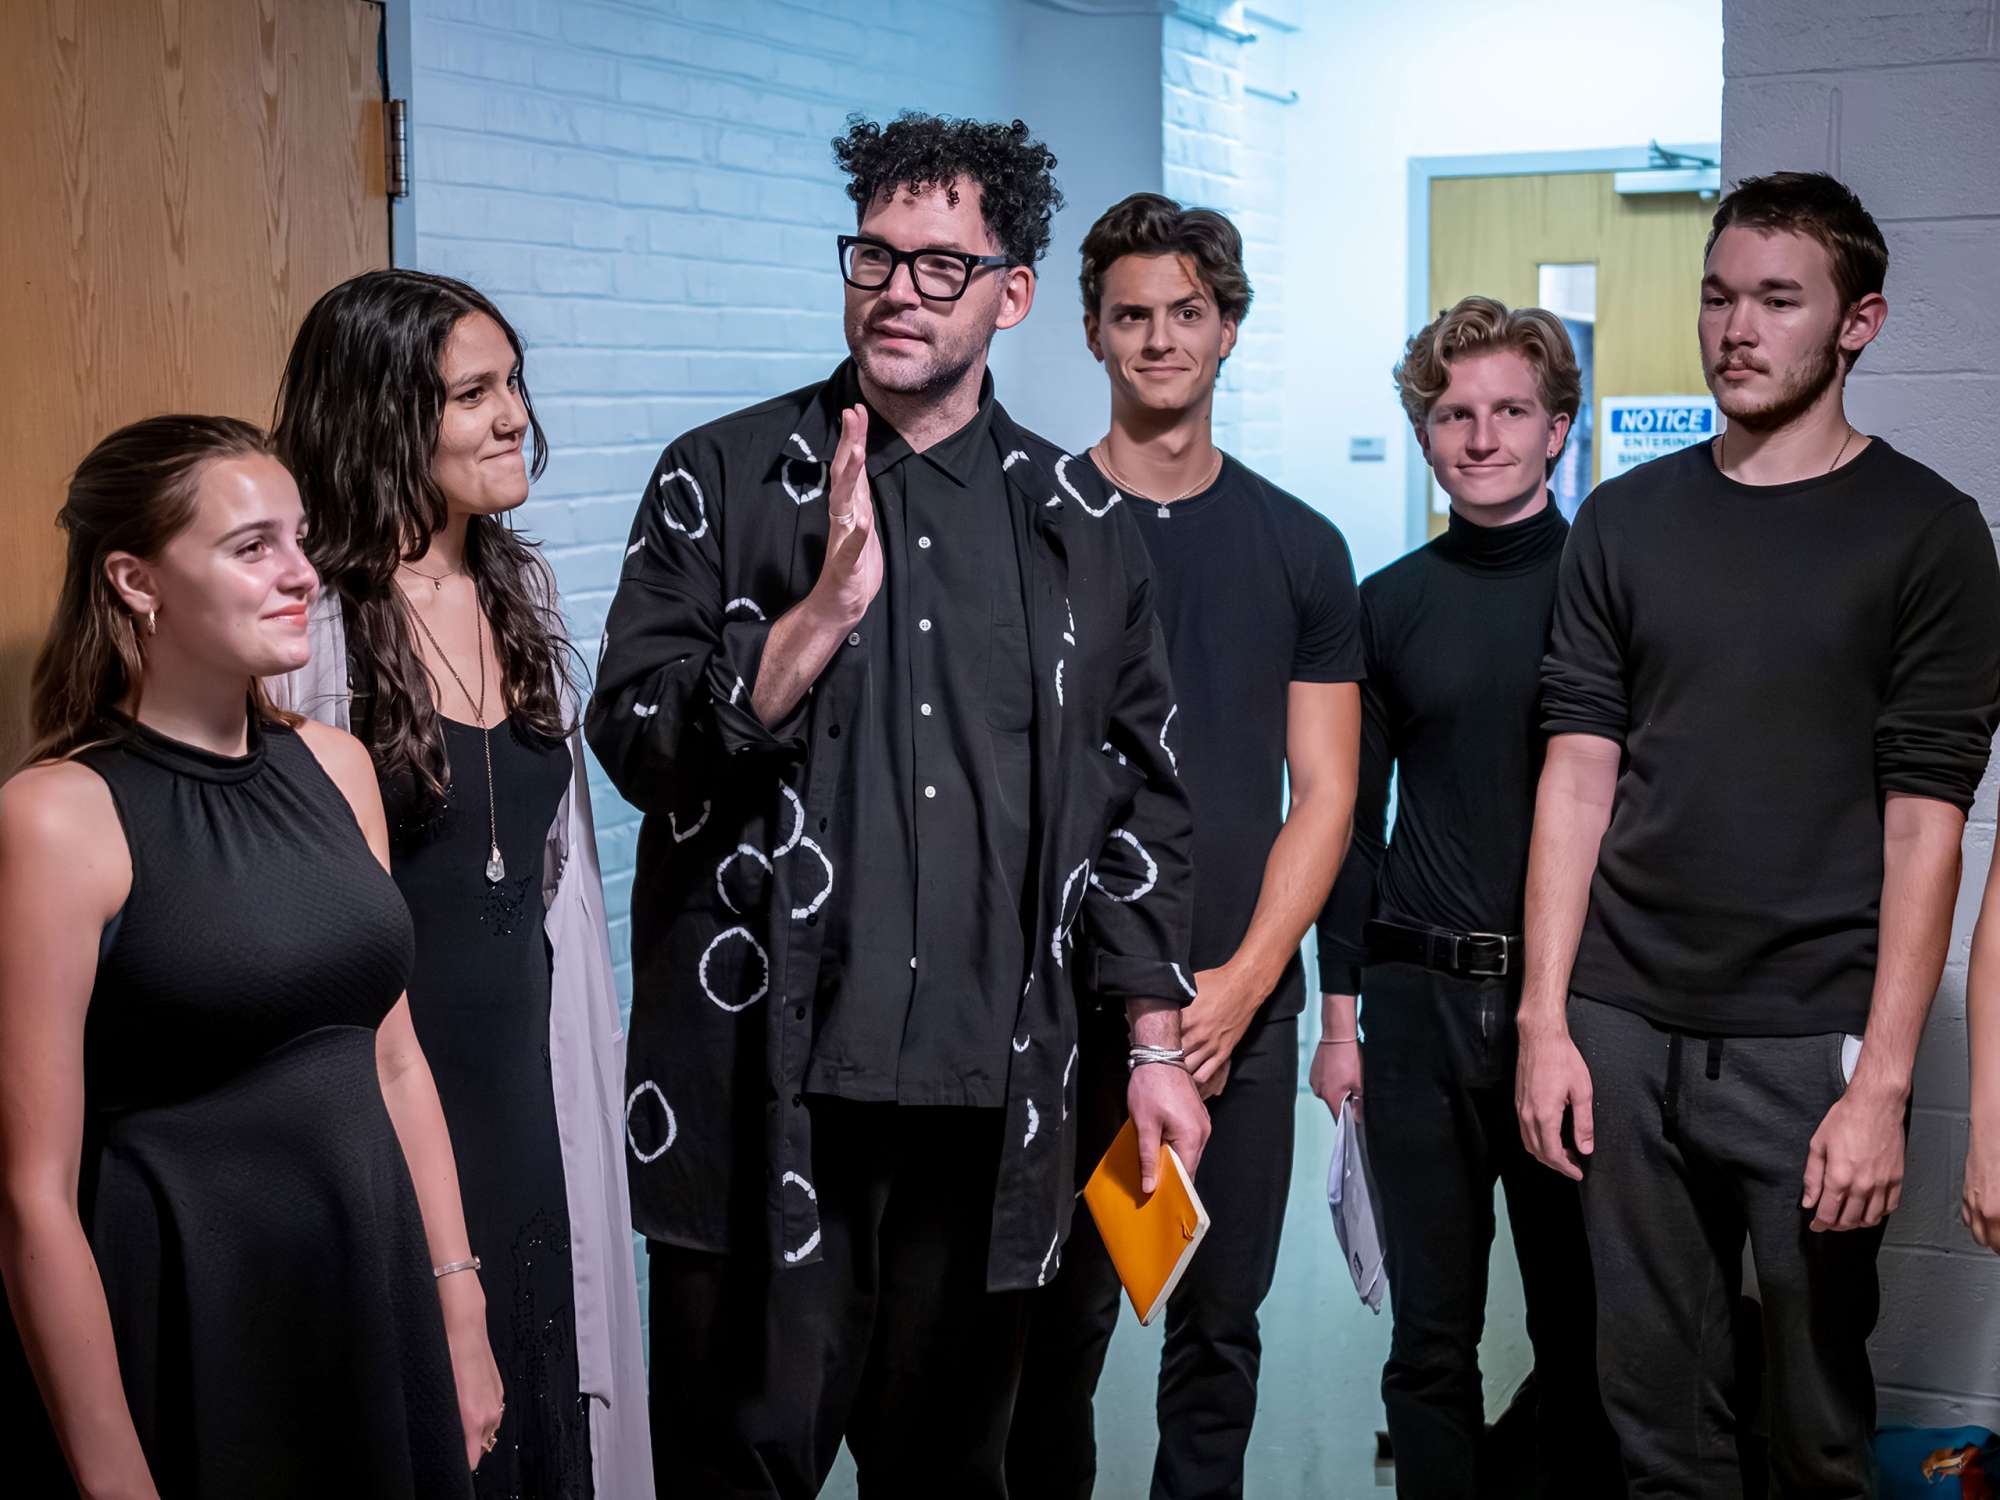 The play’s director stands in the center of five students, all dressed in black.